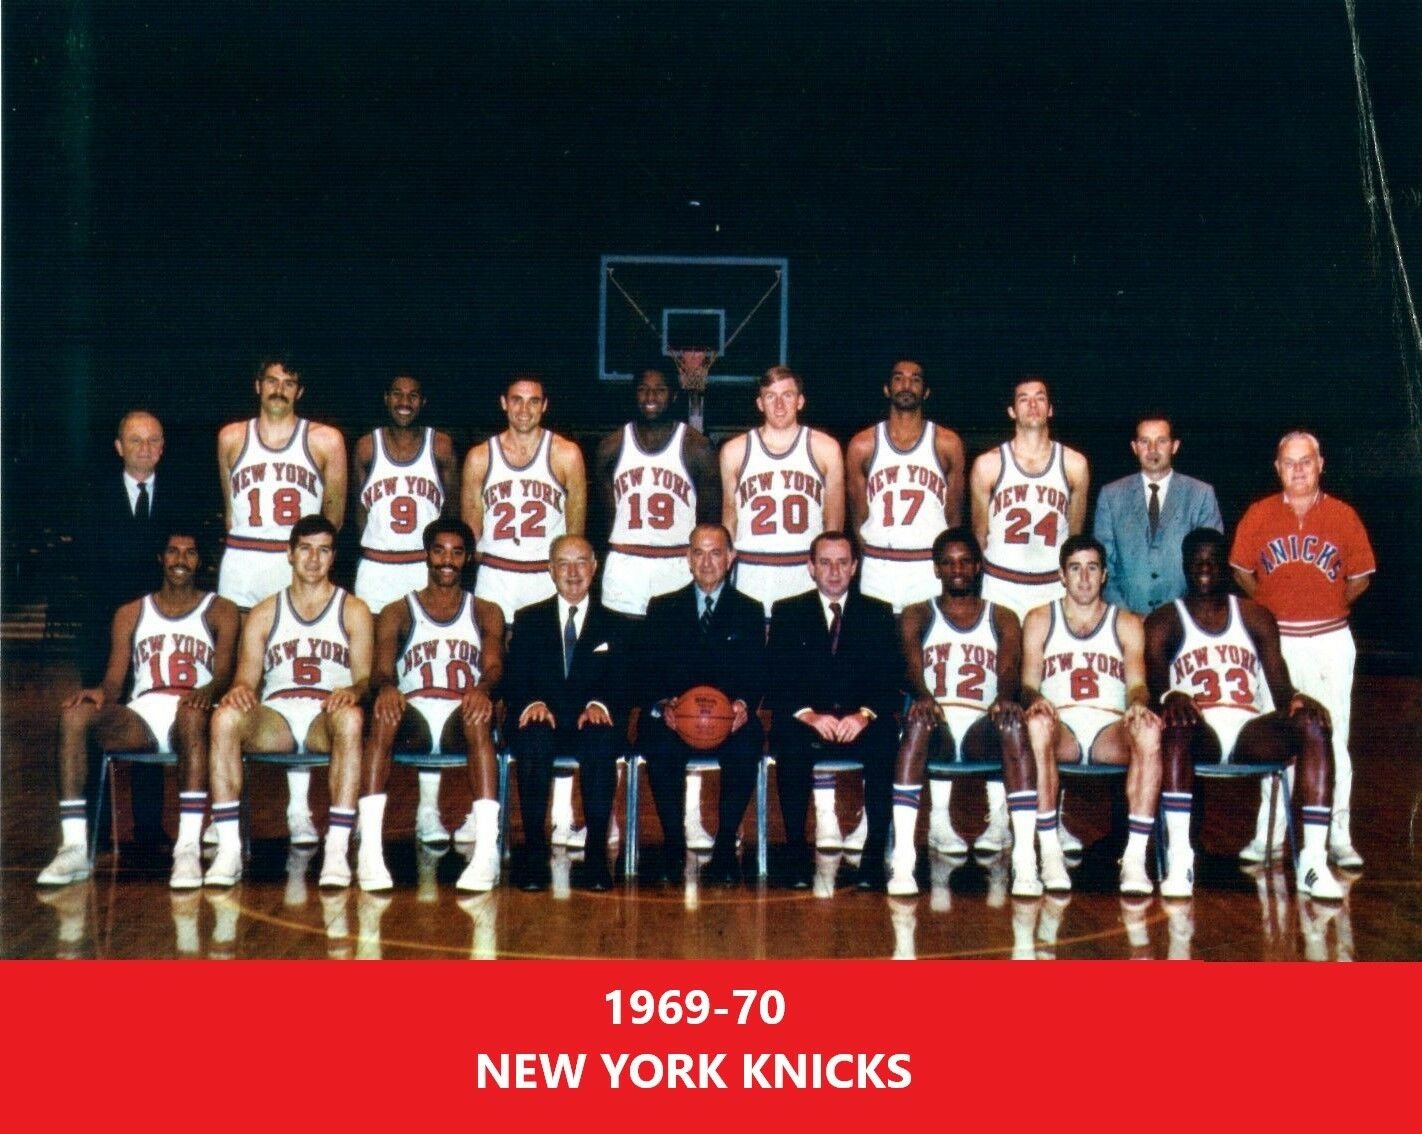 196970 NEW YORK KNICKS 8X10 TEAM PHOTO PICTURE NY BASKETBALL NBA COLOR